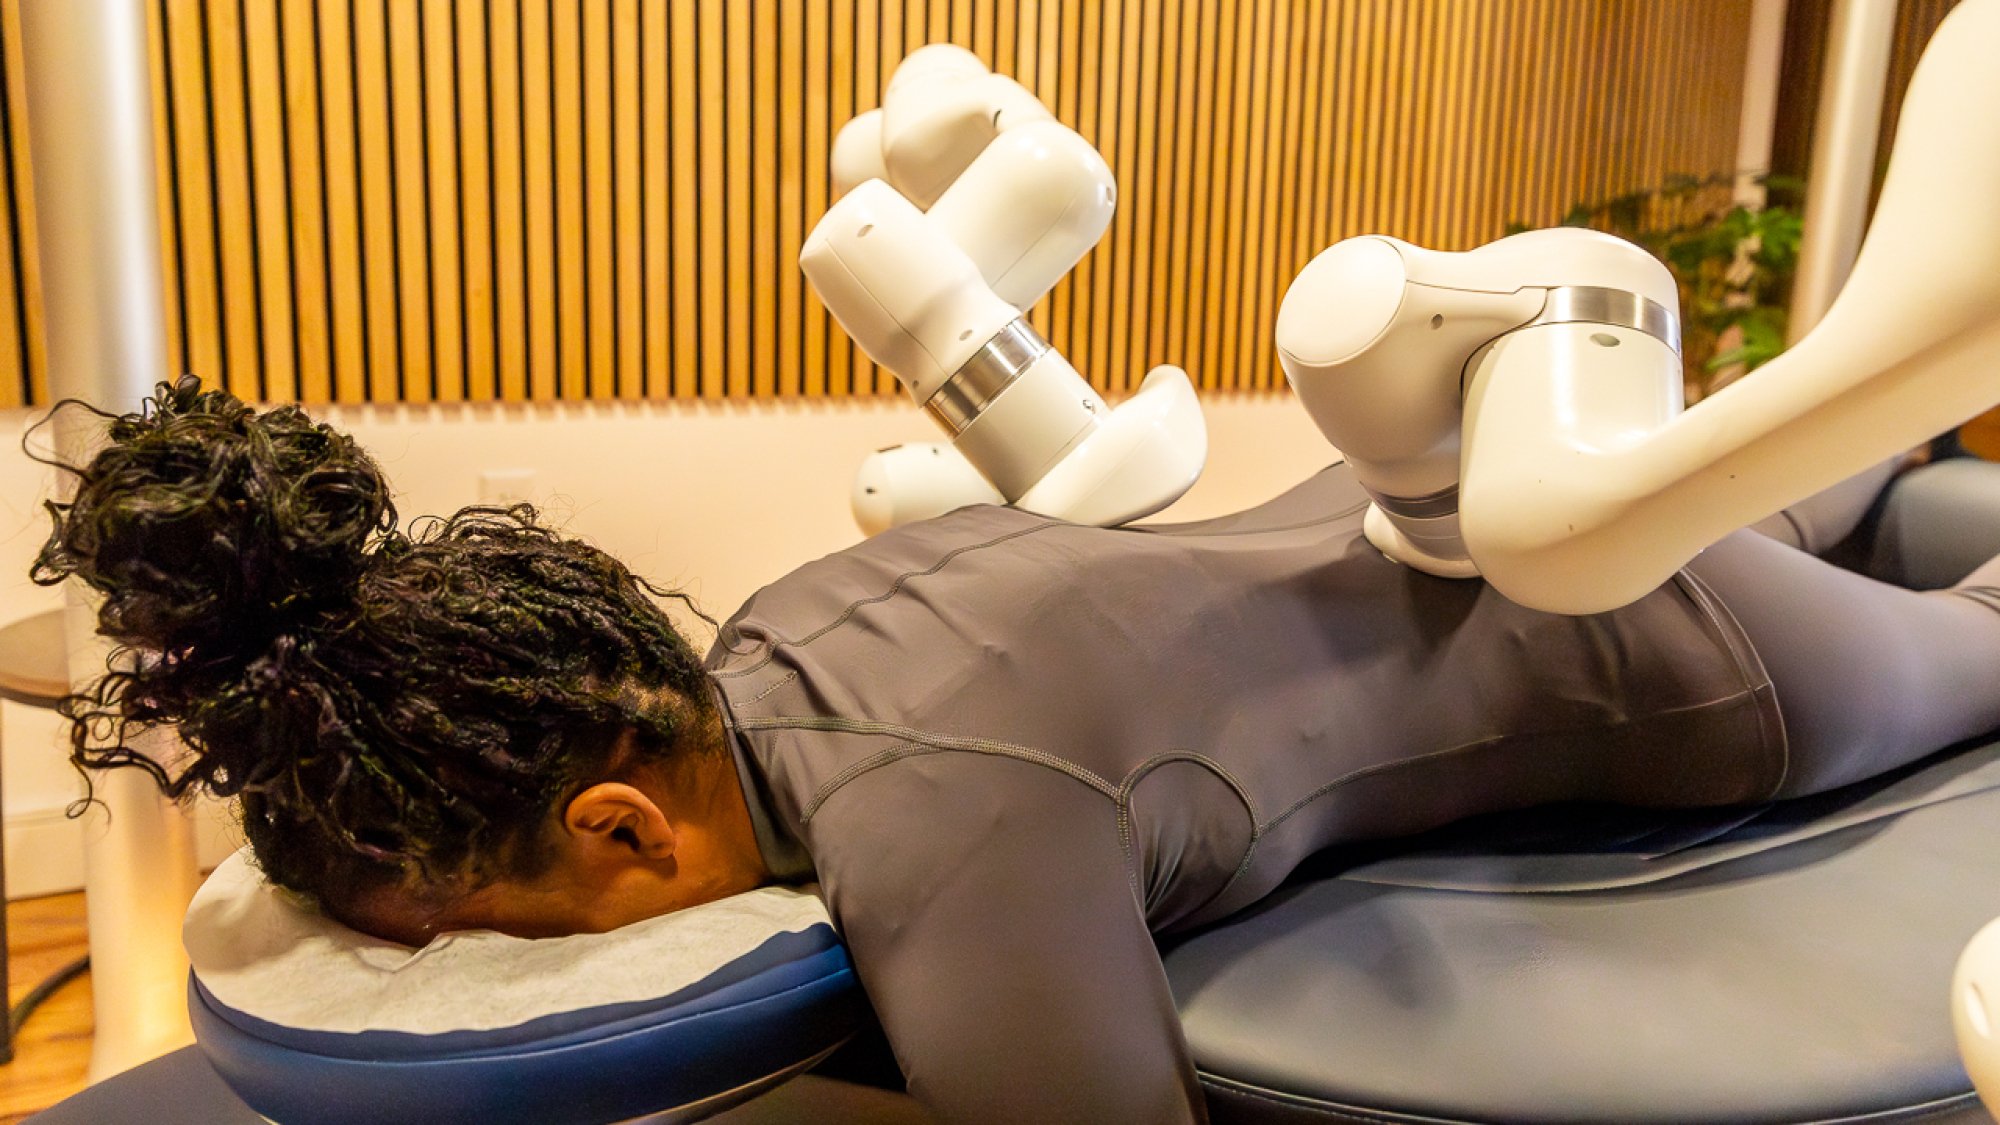 Kimberly Gedeon trying out Aescape's robot massage